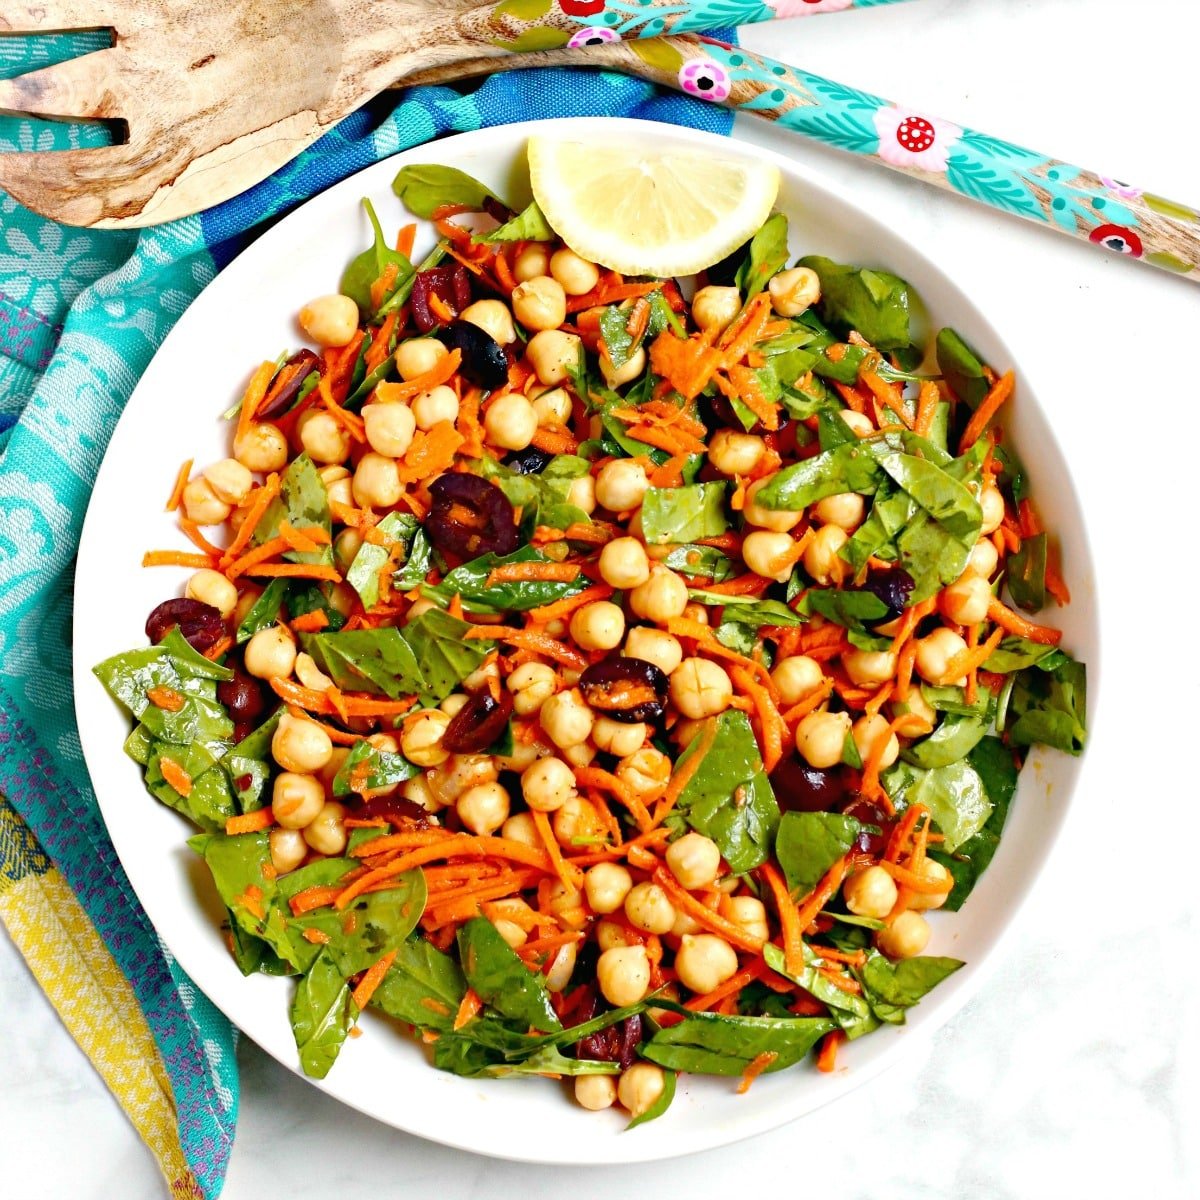 Serving bowl of spinach salad with chickpeas, carrots, and Kalamata olives.